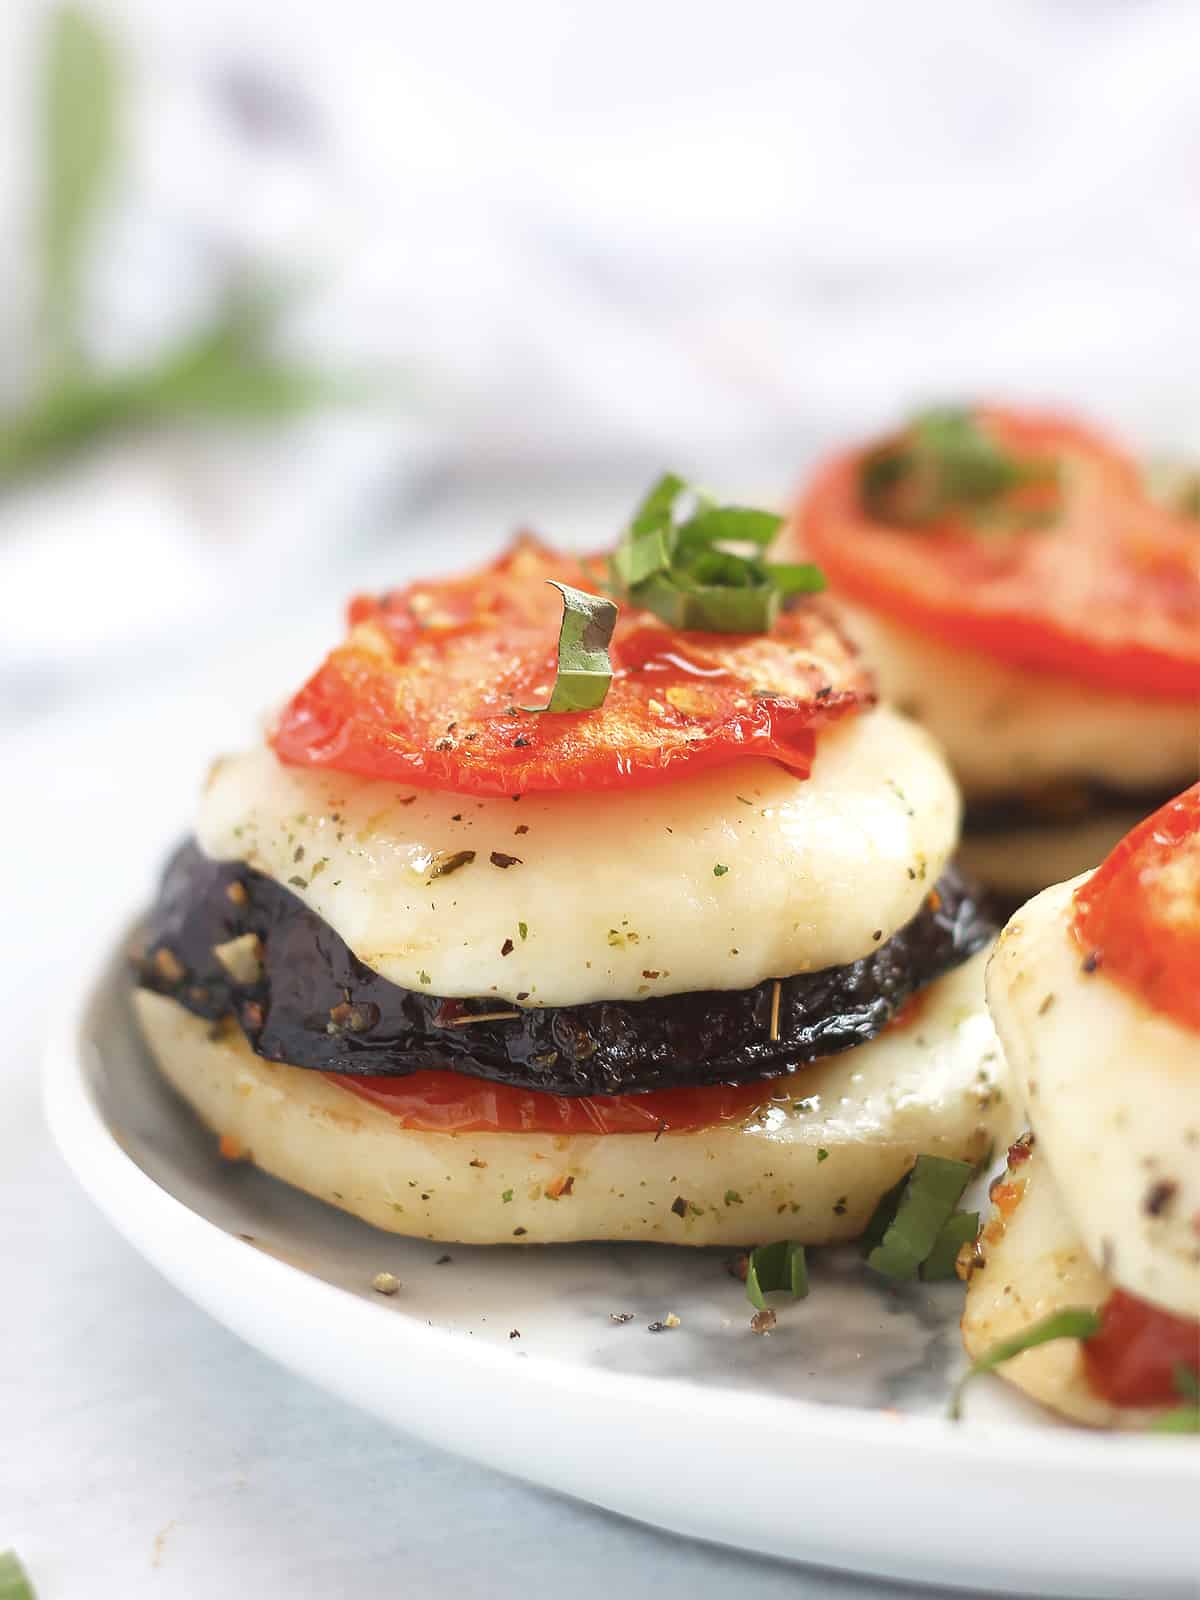 Sliced eggplant, tomato and mozzarella stacked on top of each other and garnished with fresh basil.